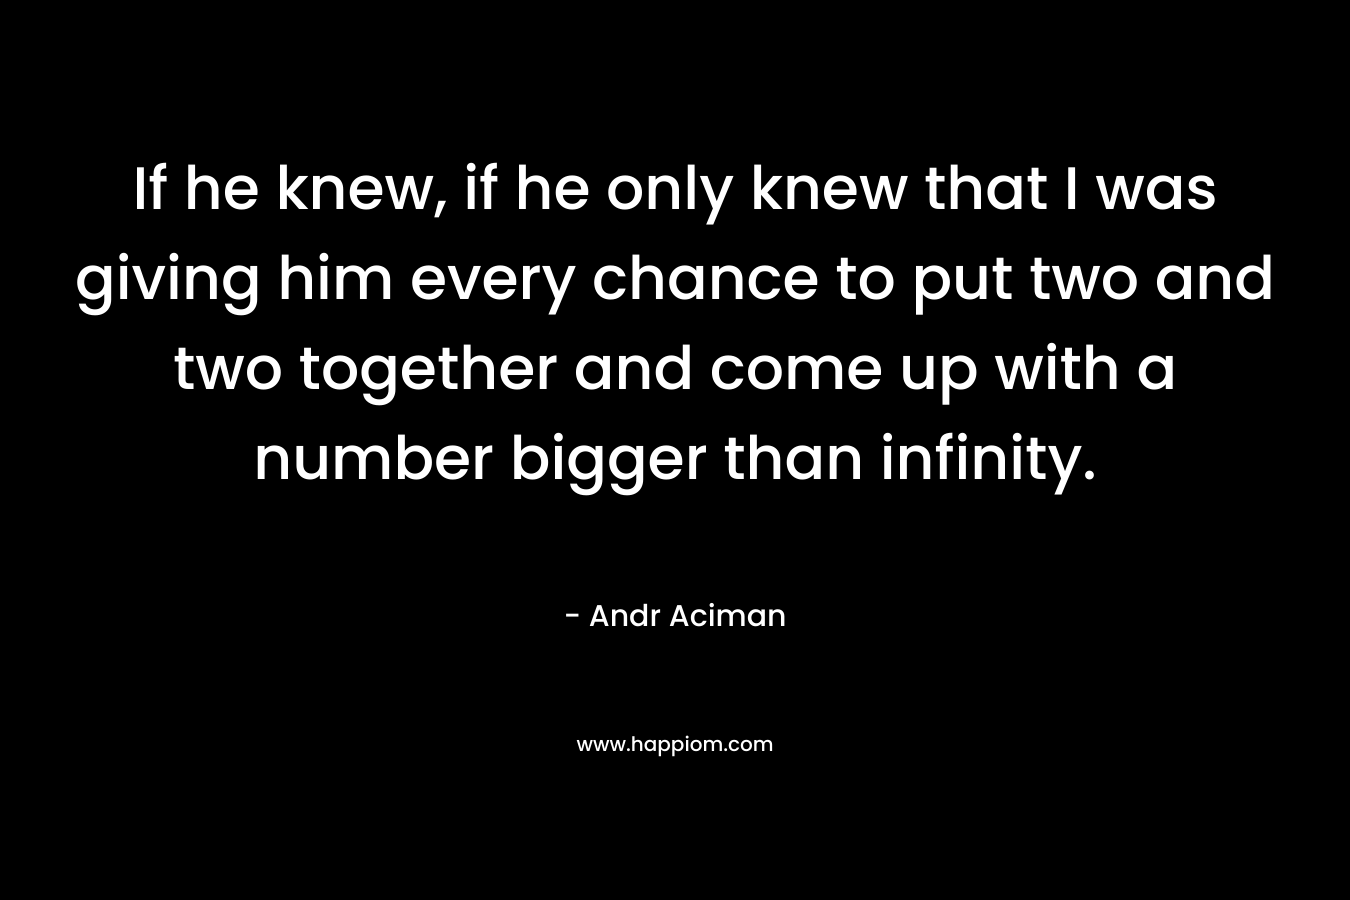 If he knew, if he only knew that I was giving him every chance to put two and two together and come up with a number bigger than infinity. – Andr Aciman